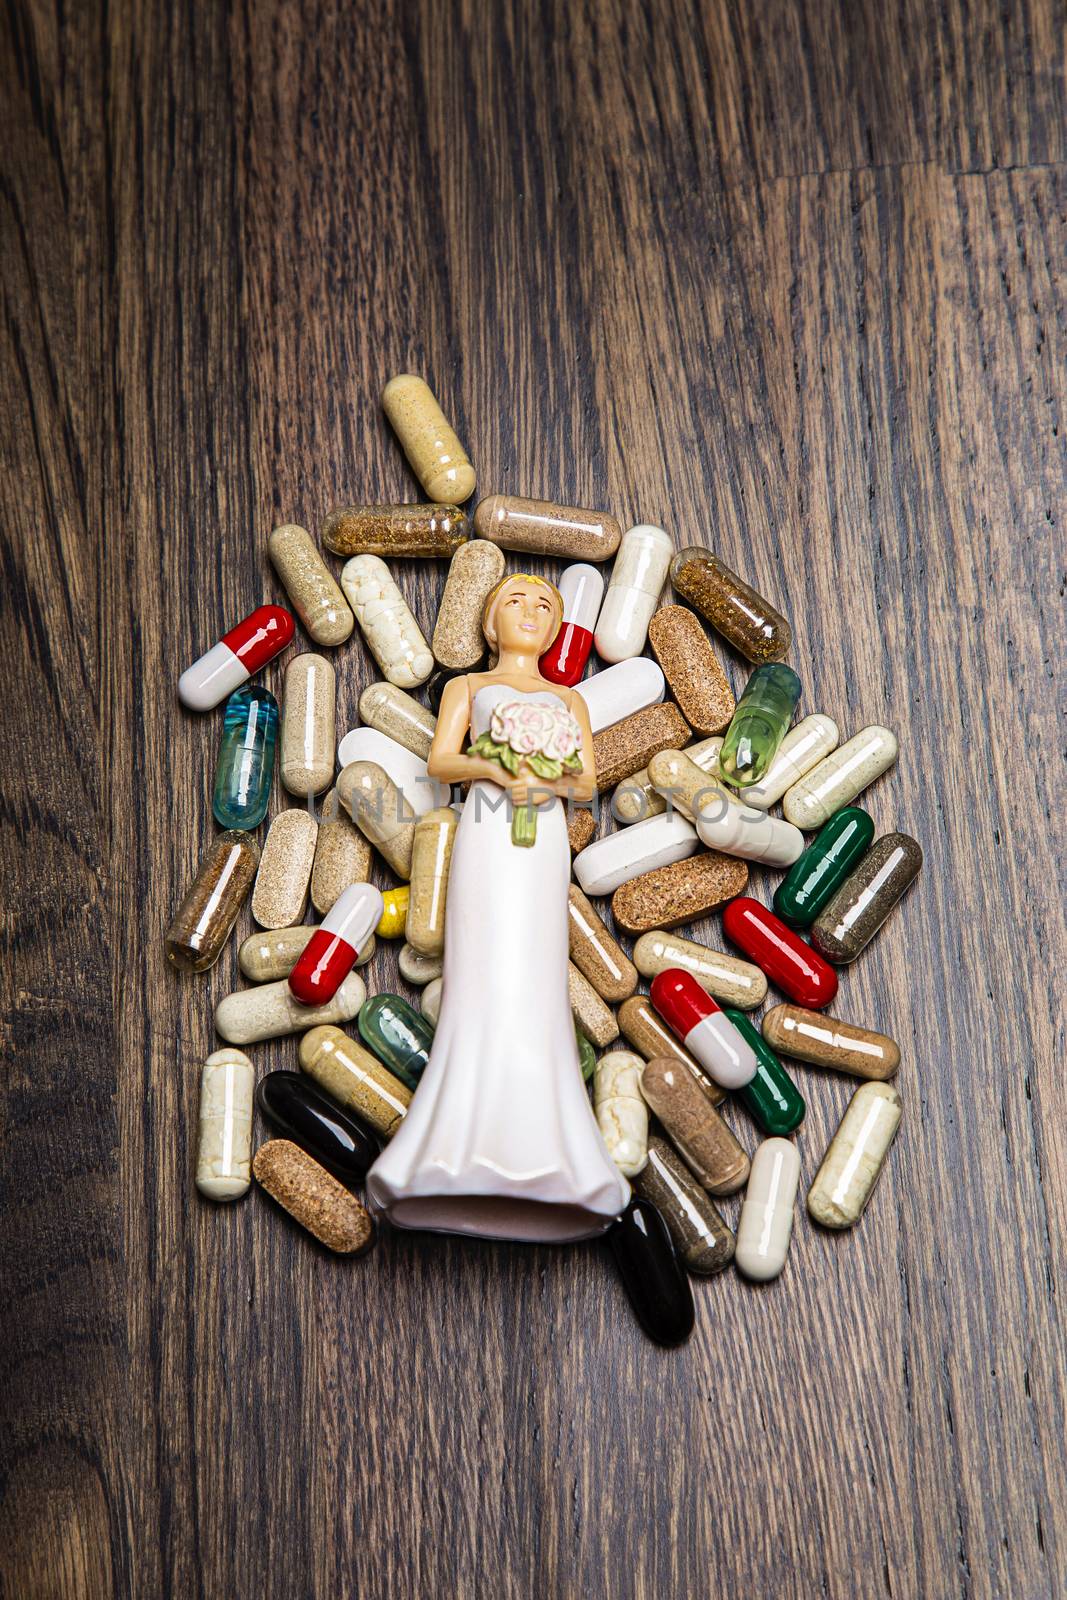 Bride and natural supplements by mypstudio